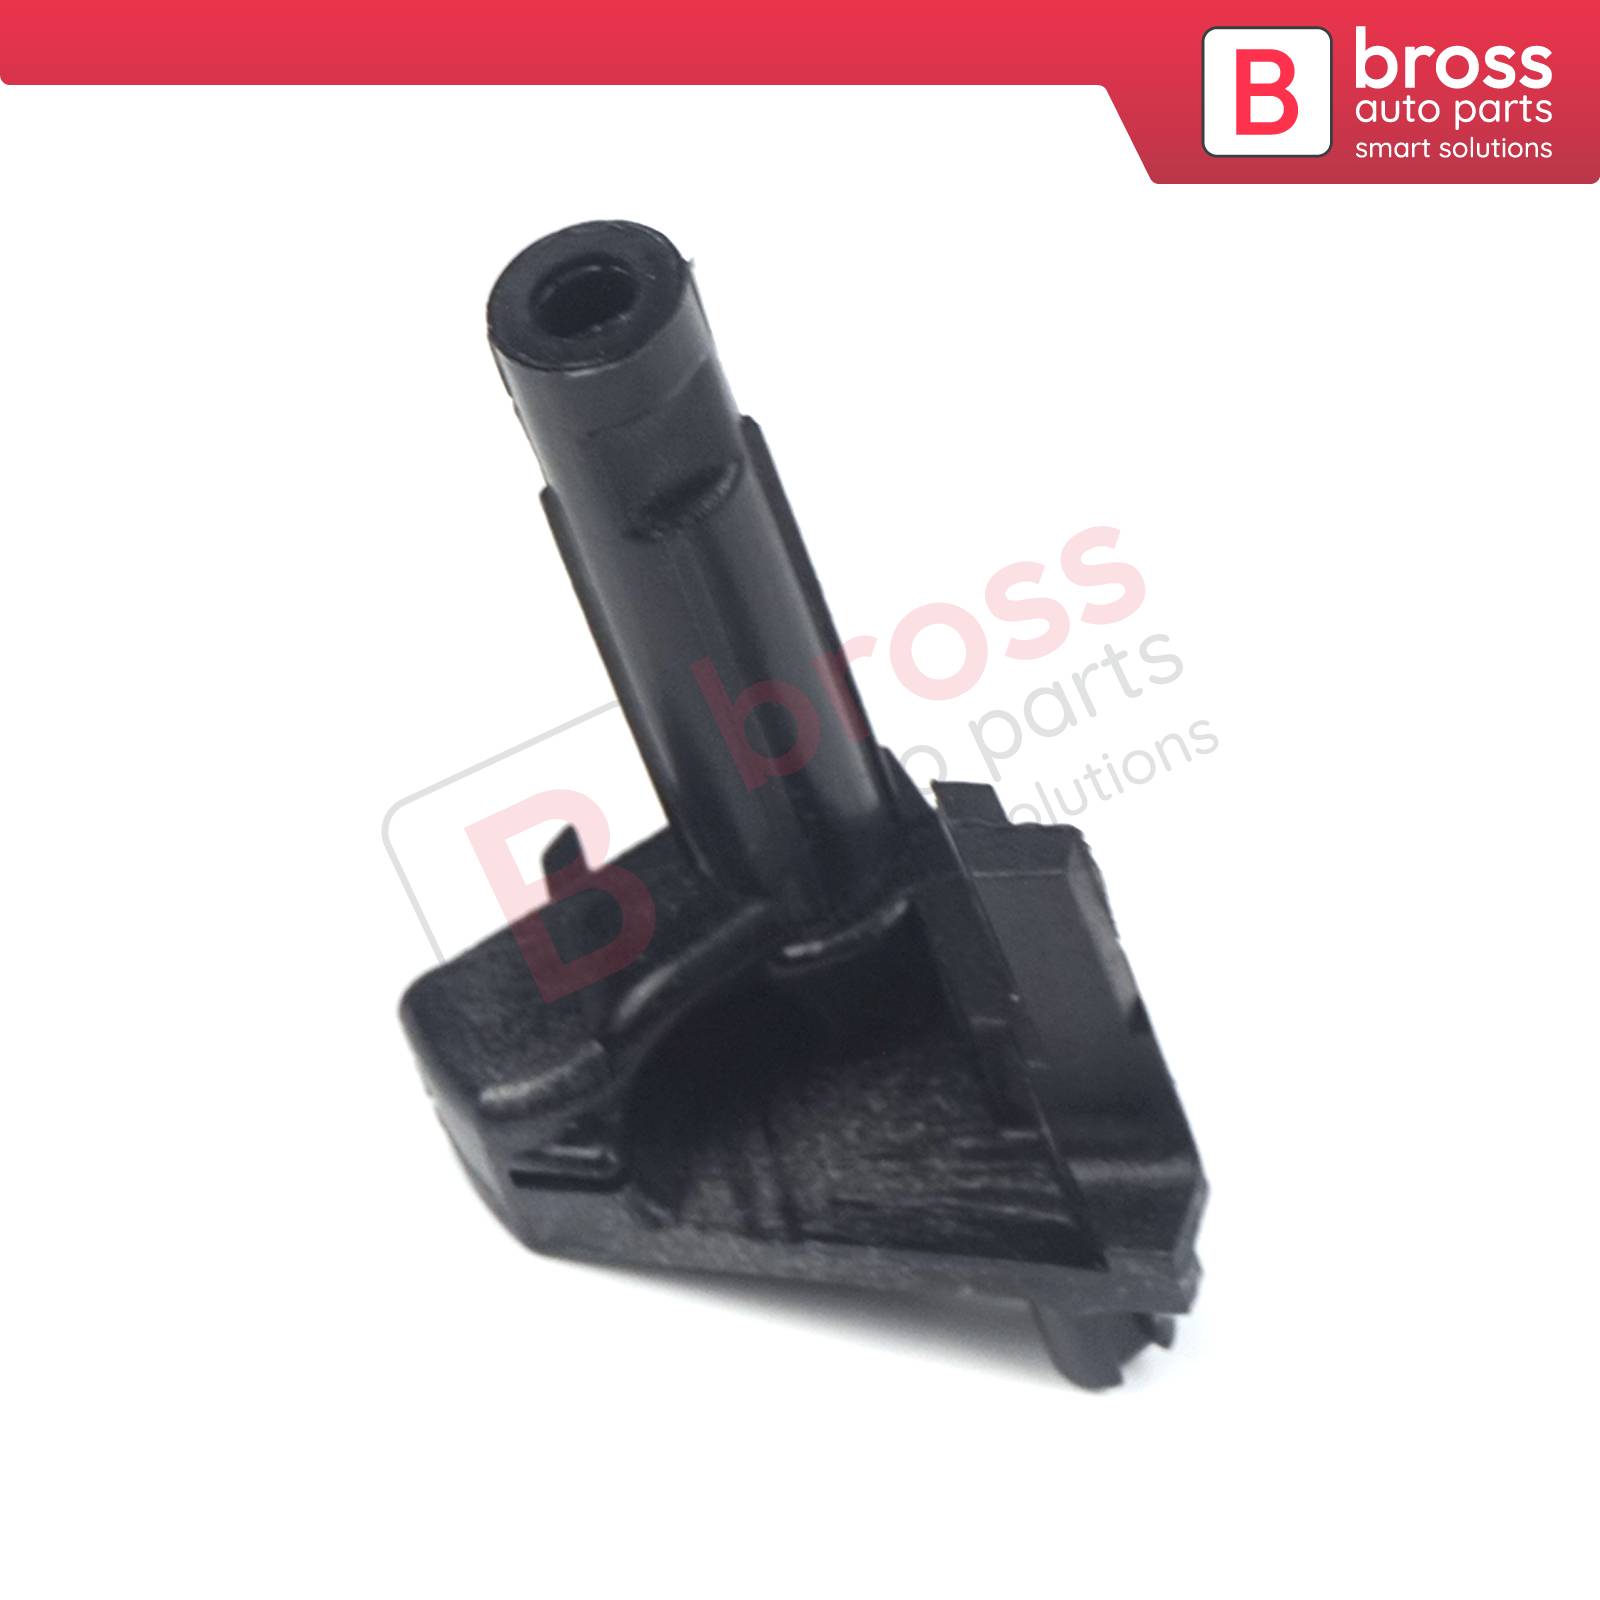 Bross Auto Parts - BDP536 Driver and Middle Doors Outer Handle Support  Repair Plastic for Renault Master 3 Opel Movano B Nissan NV400